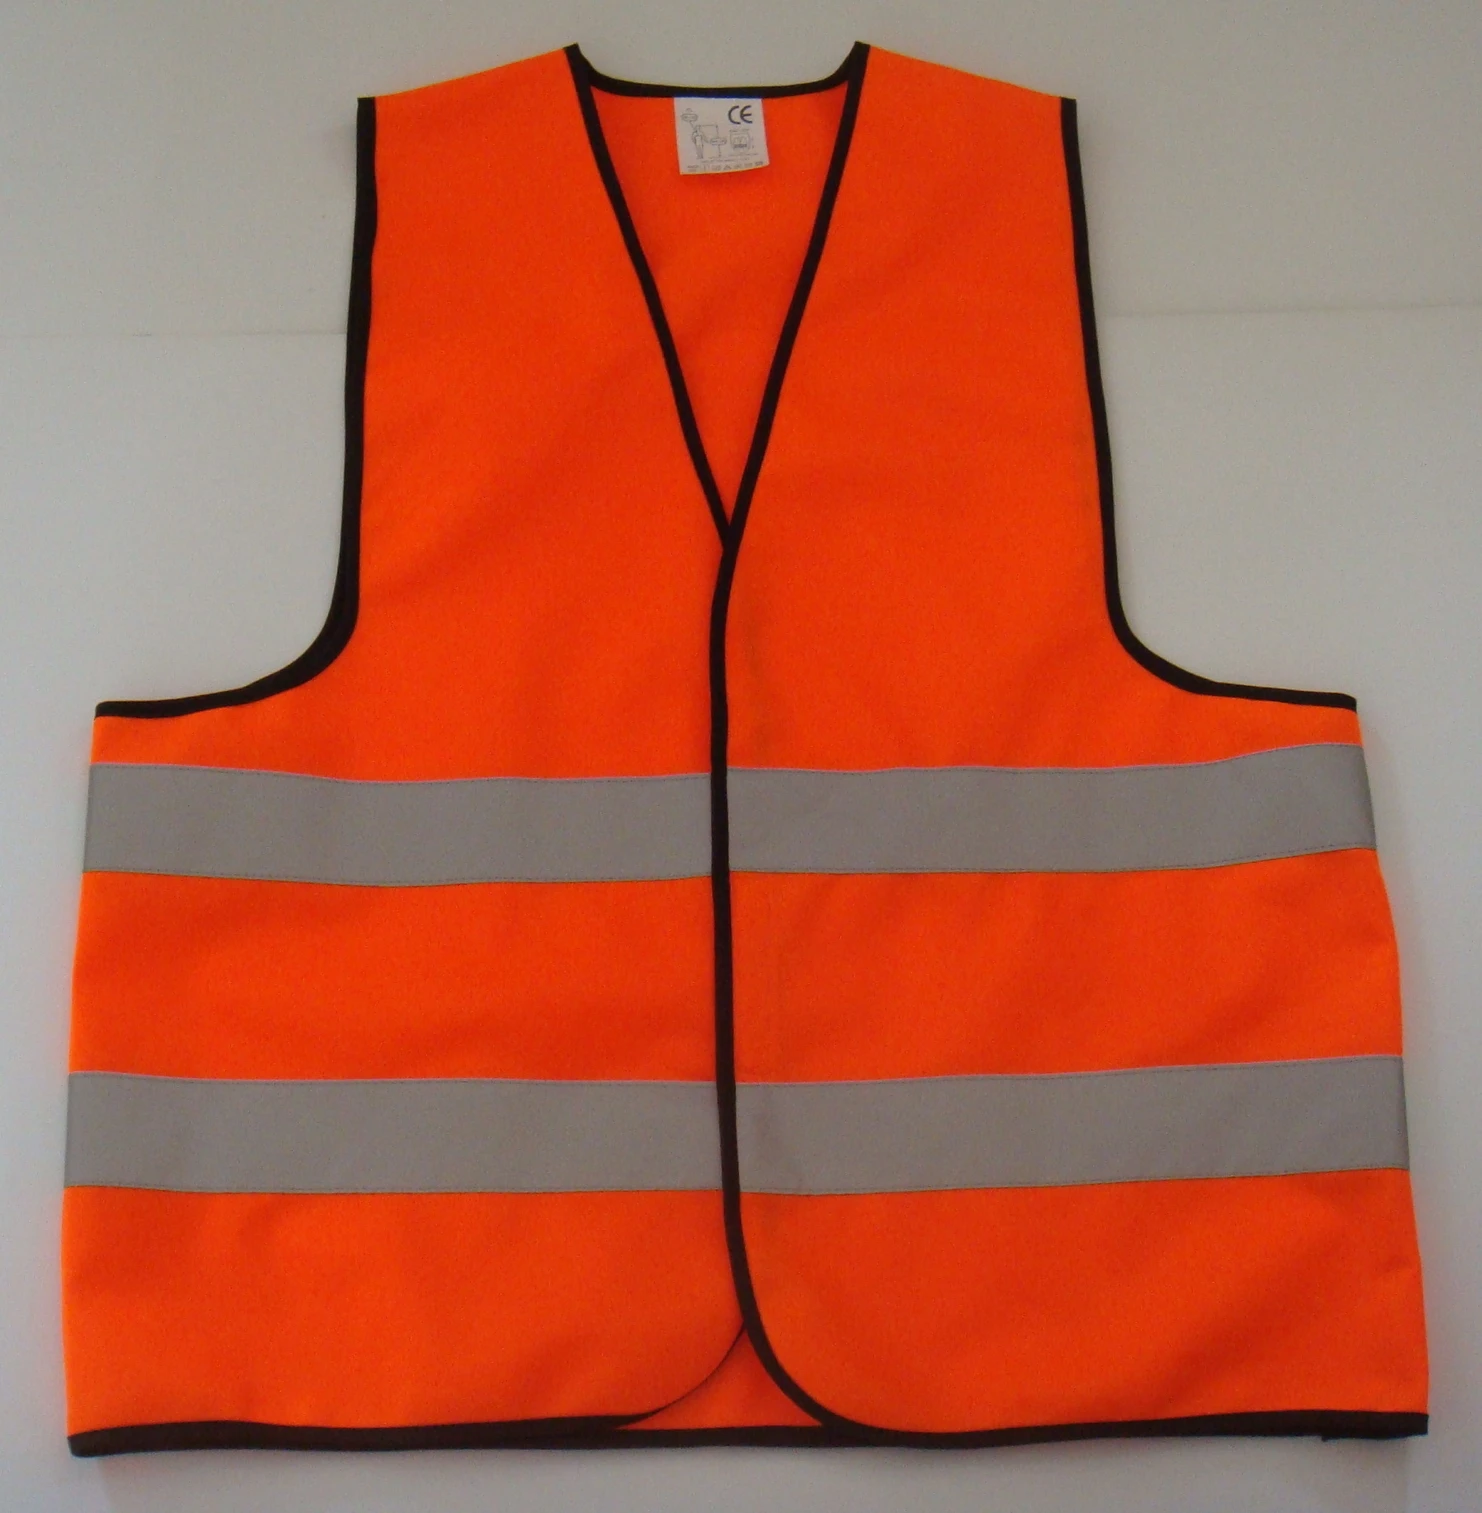 BCG Reflective Running Vest S/m Yellow Bright SLBCFA6900 for sale online 